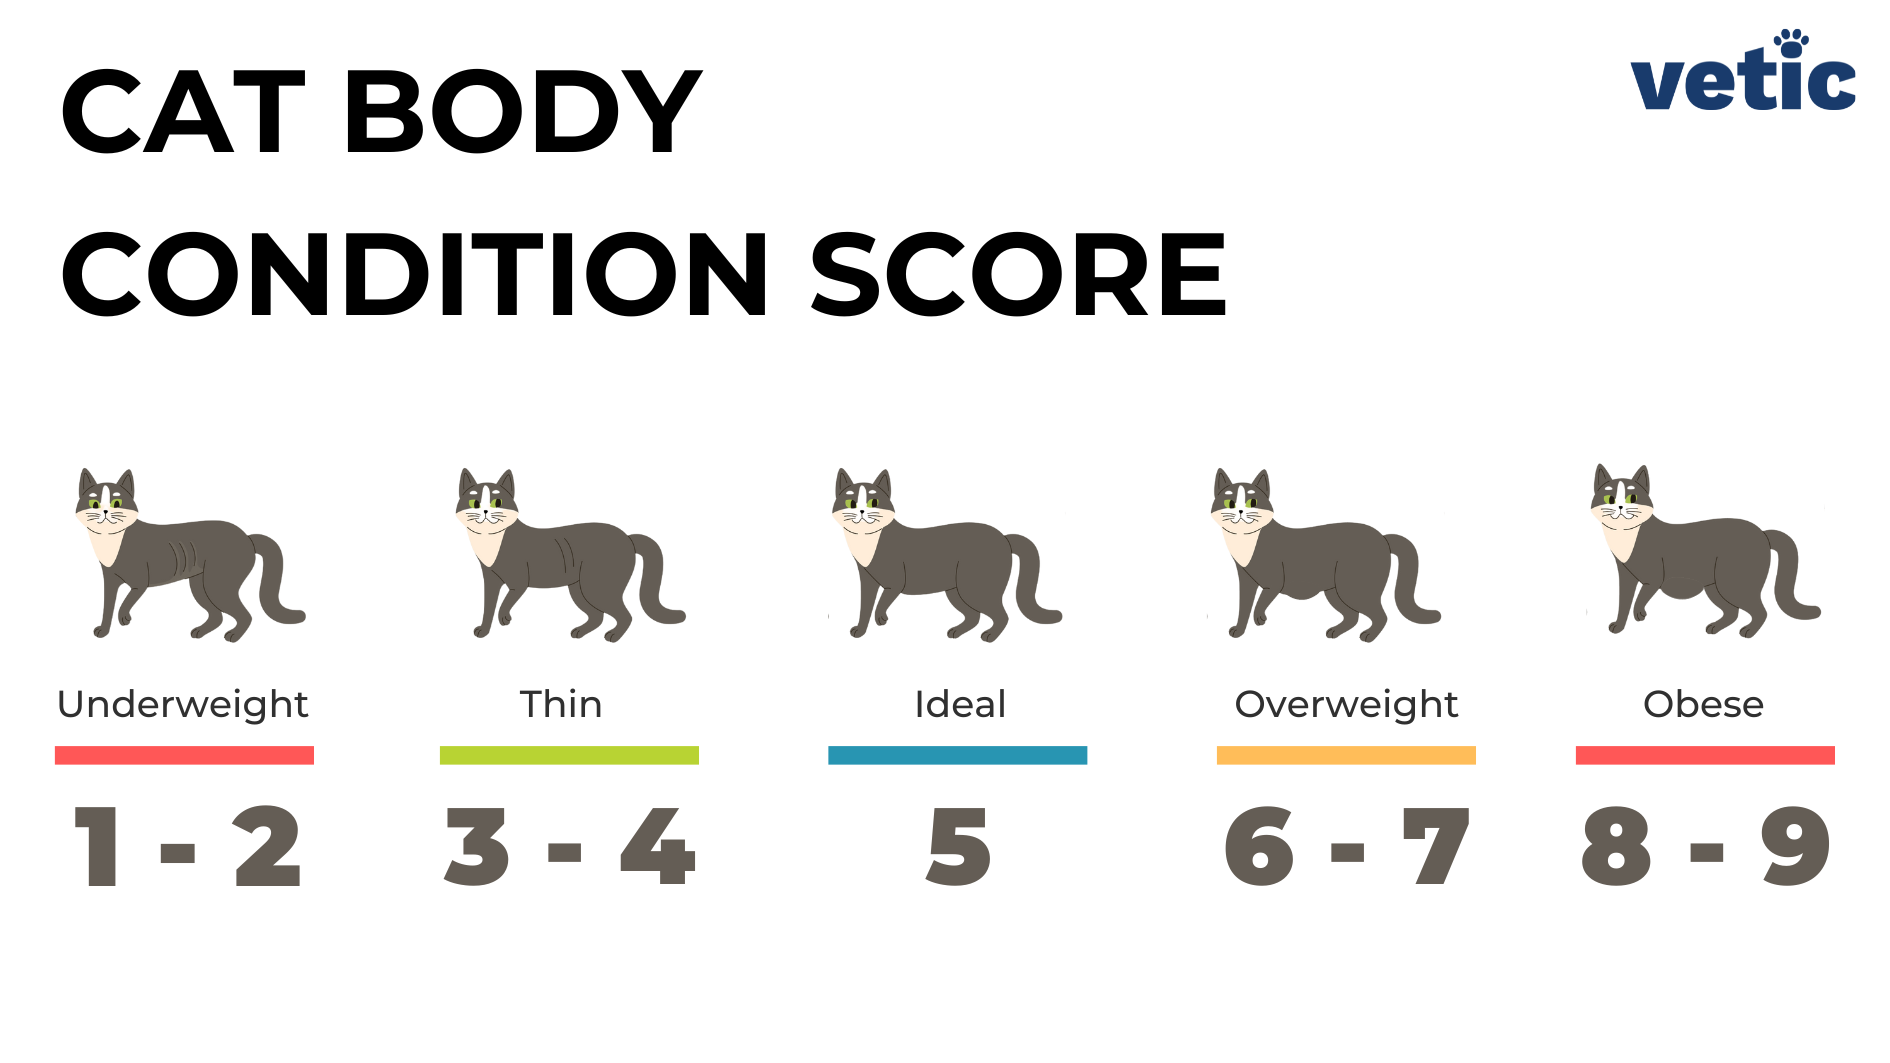 Infographic titled body condition score cat - cats with a body score between 1 and 2 are thin, 5 is ideal, 6 - 7 are overweight and 8 - 9 are obese. obesity in cats can easily be detected by owners by following this chart.